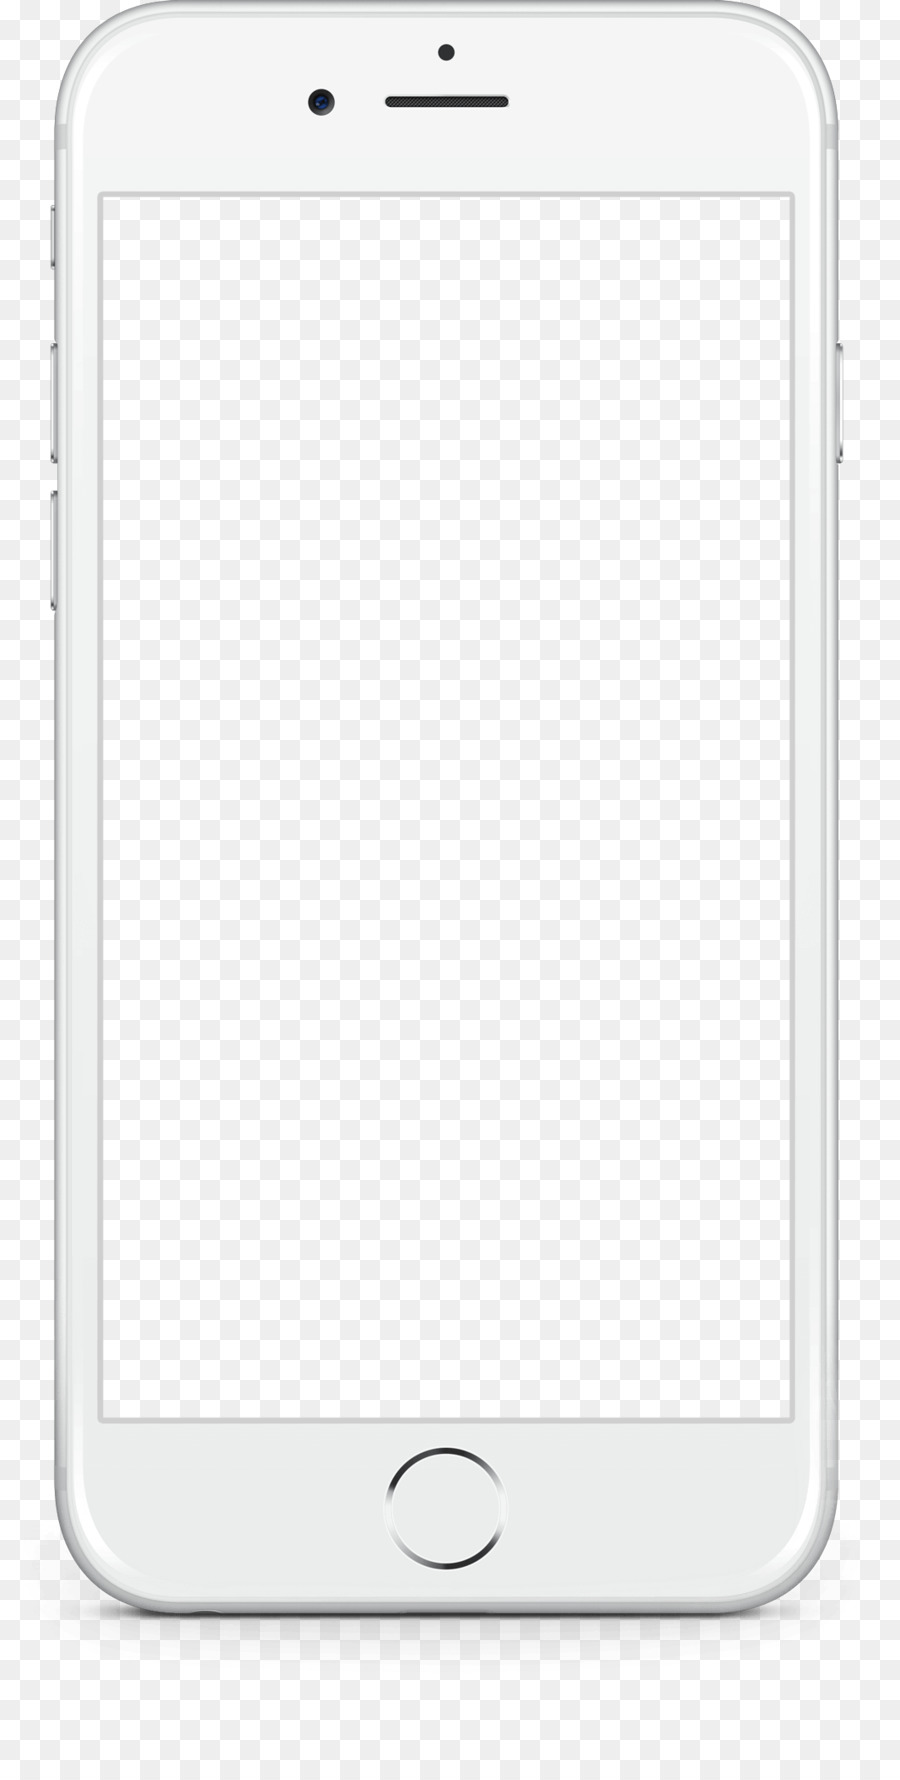 iPhone 6 Smartphone - Iphone png download - 1067*2106 - Free Transparent Iphone 6 png Download.